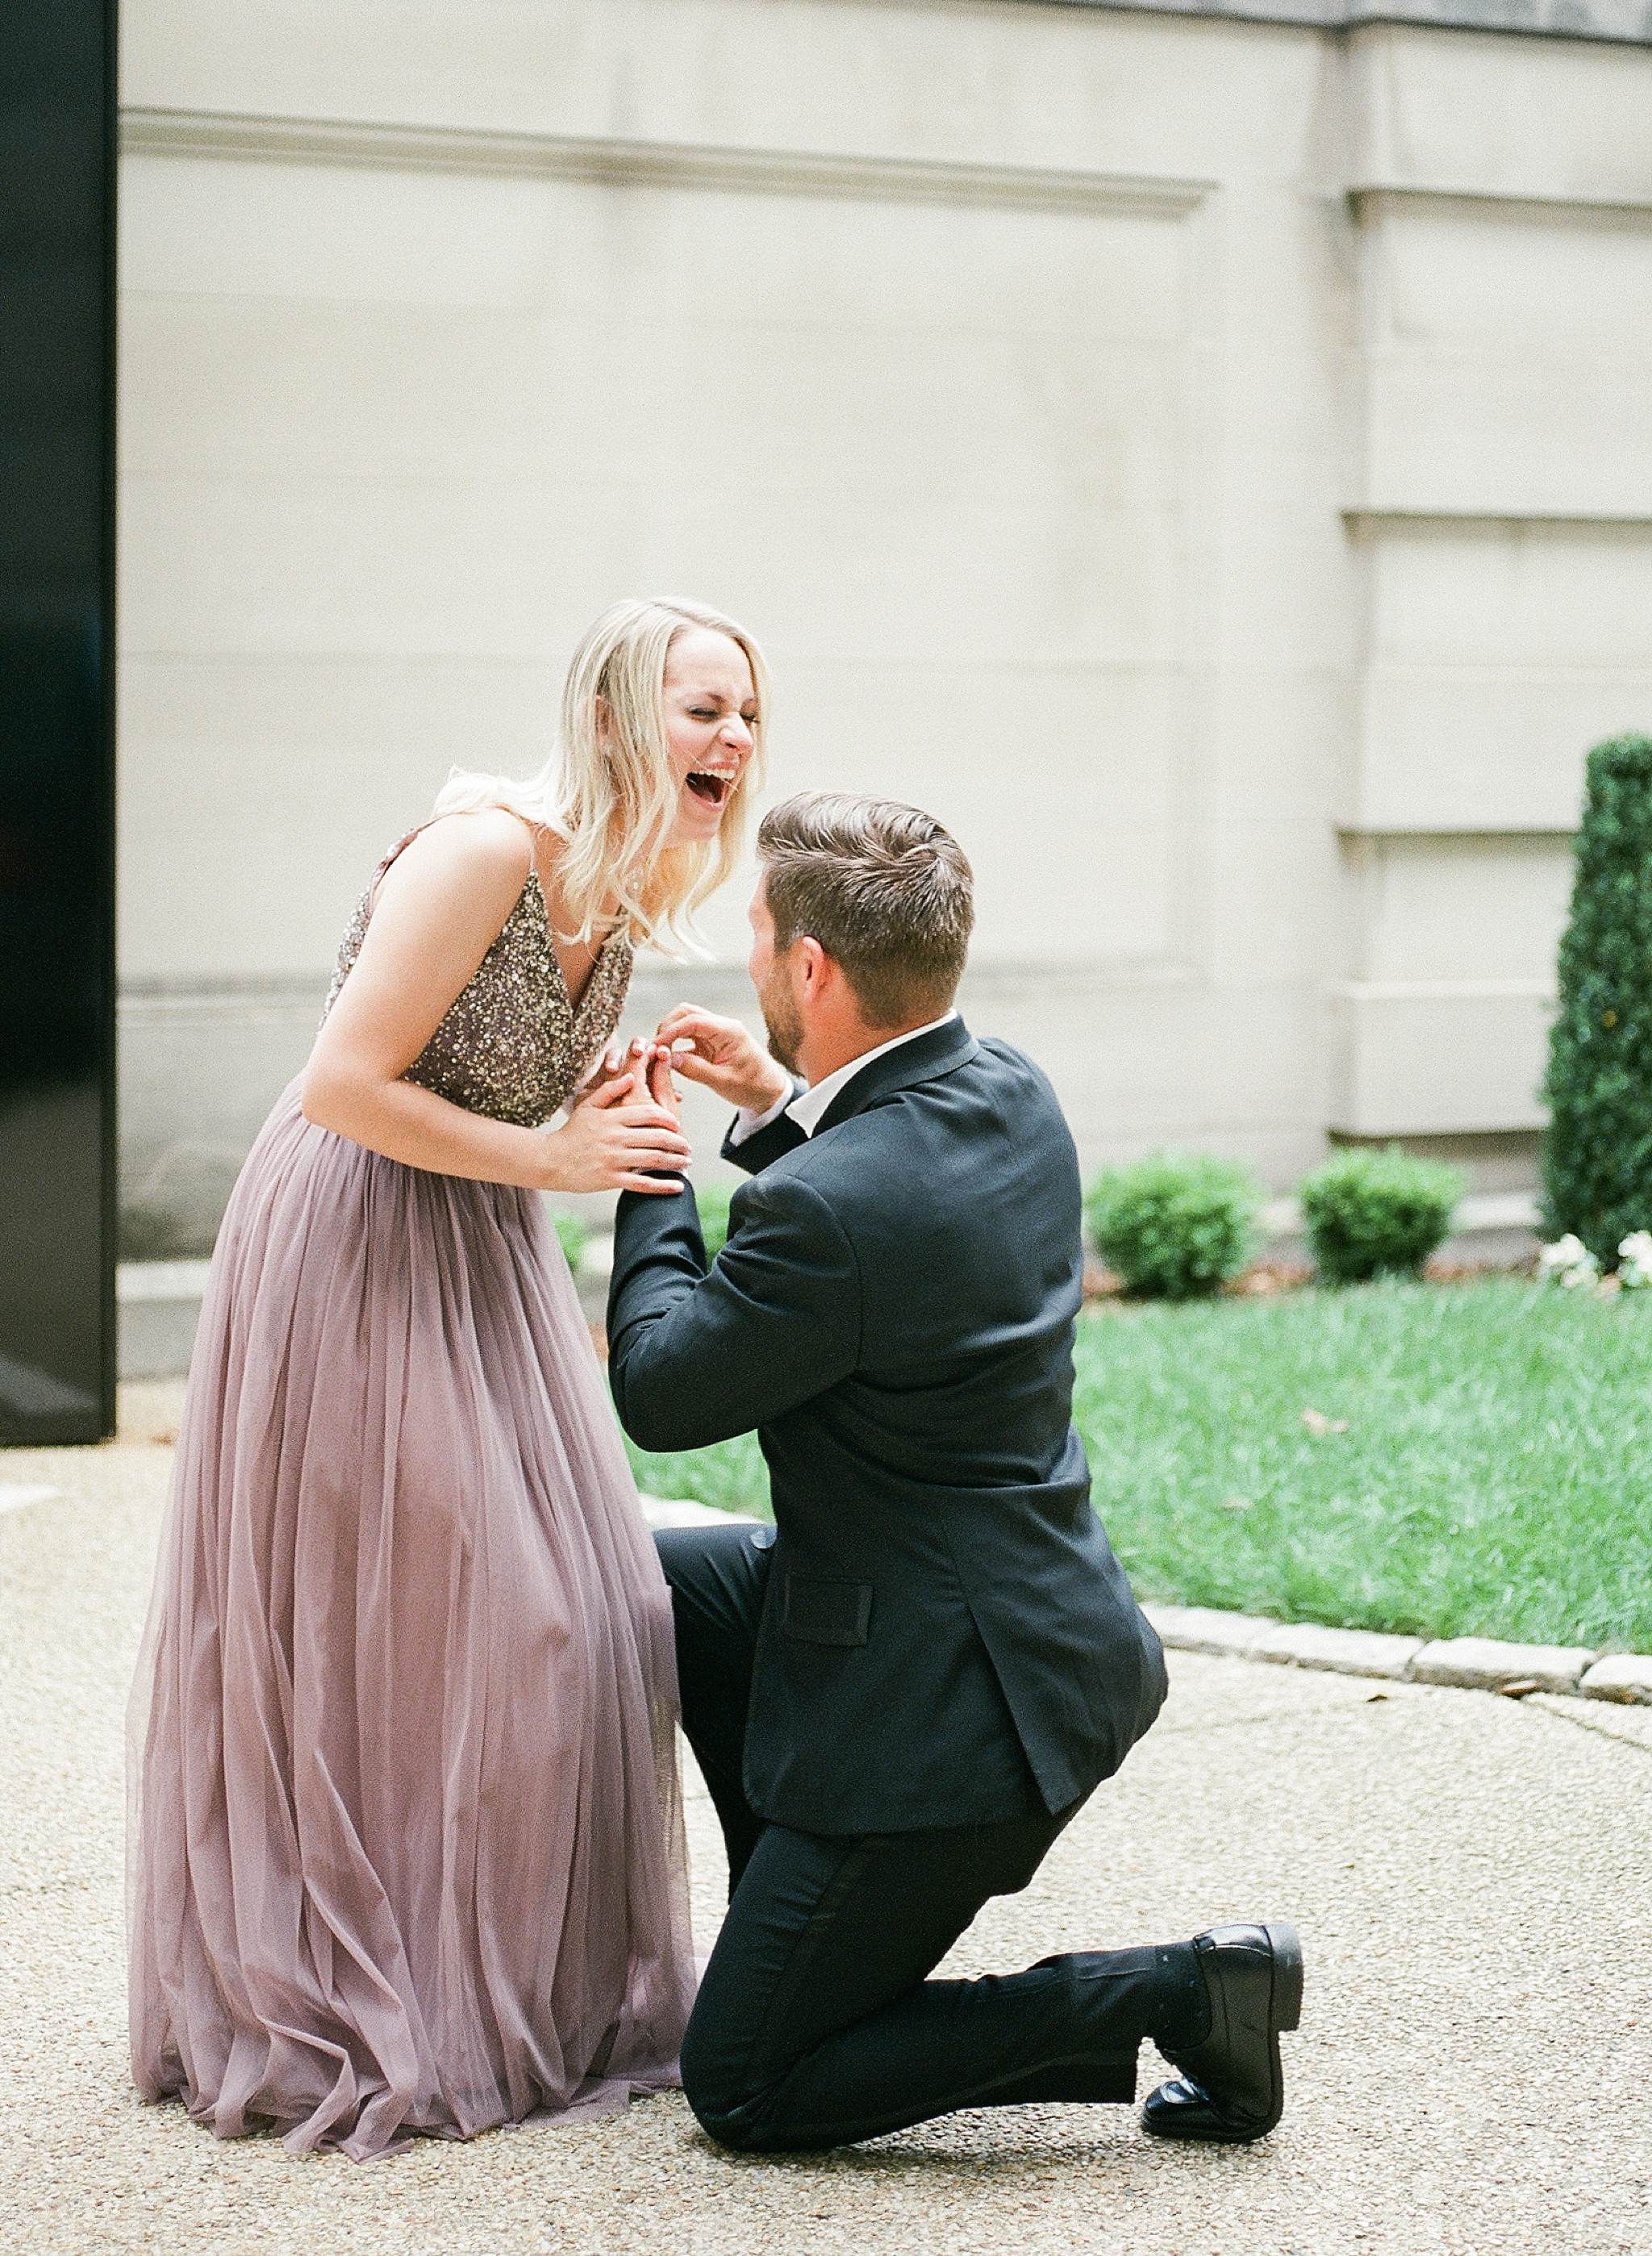 This proposal turned engagement session was photographed at the Anderson House in Washington, DC by film photographer Alicia Lacey.